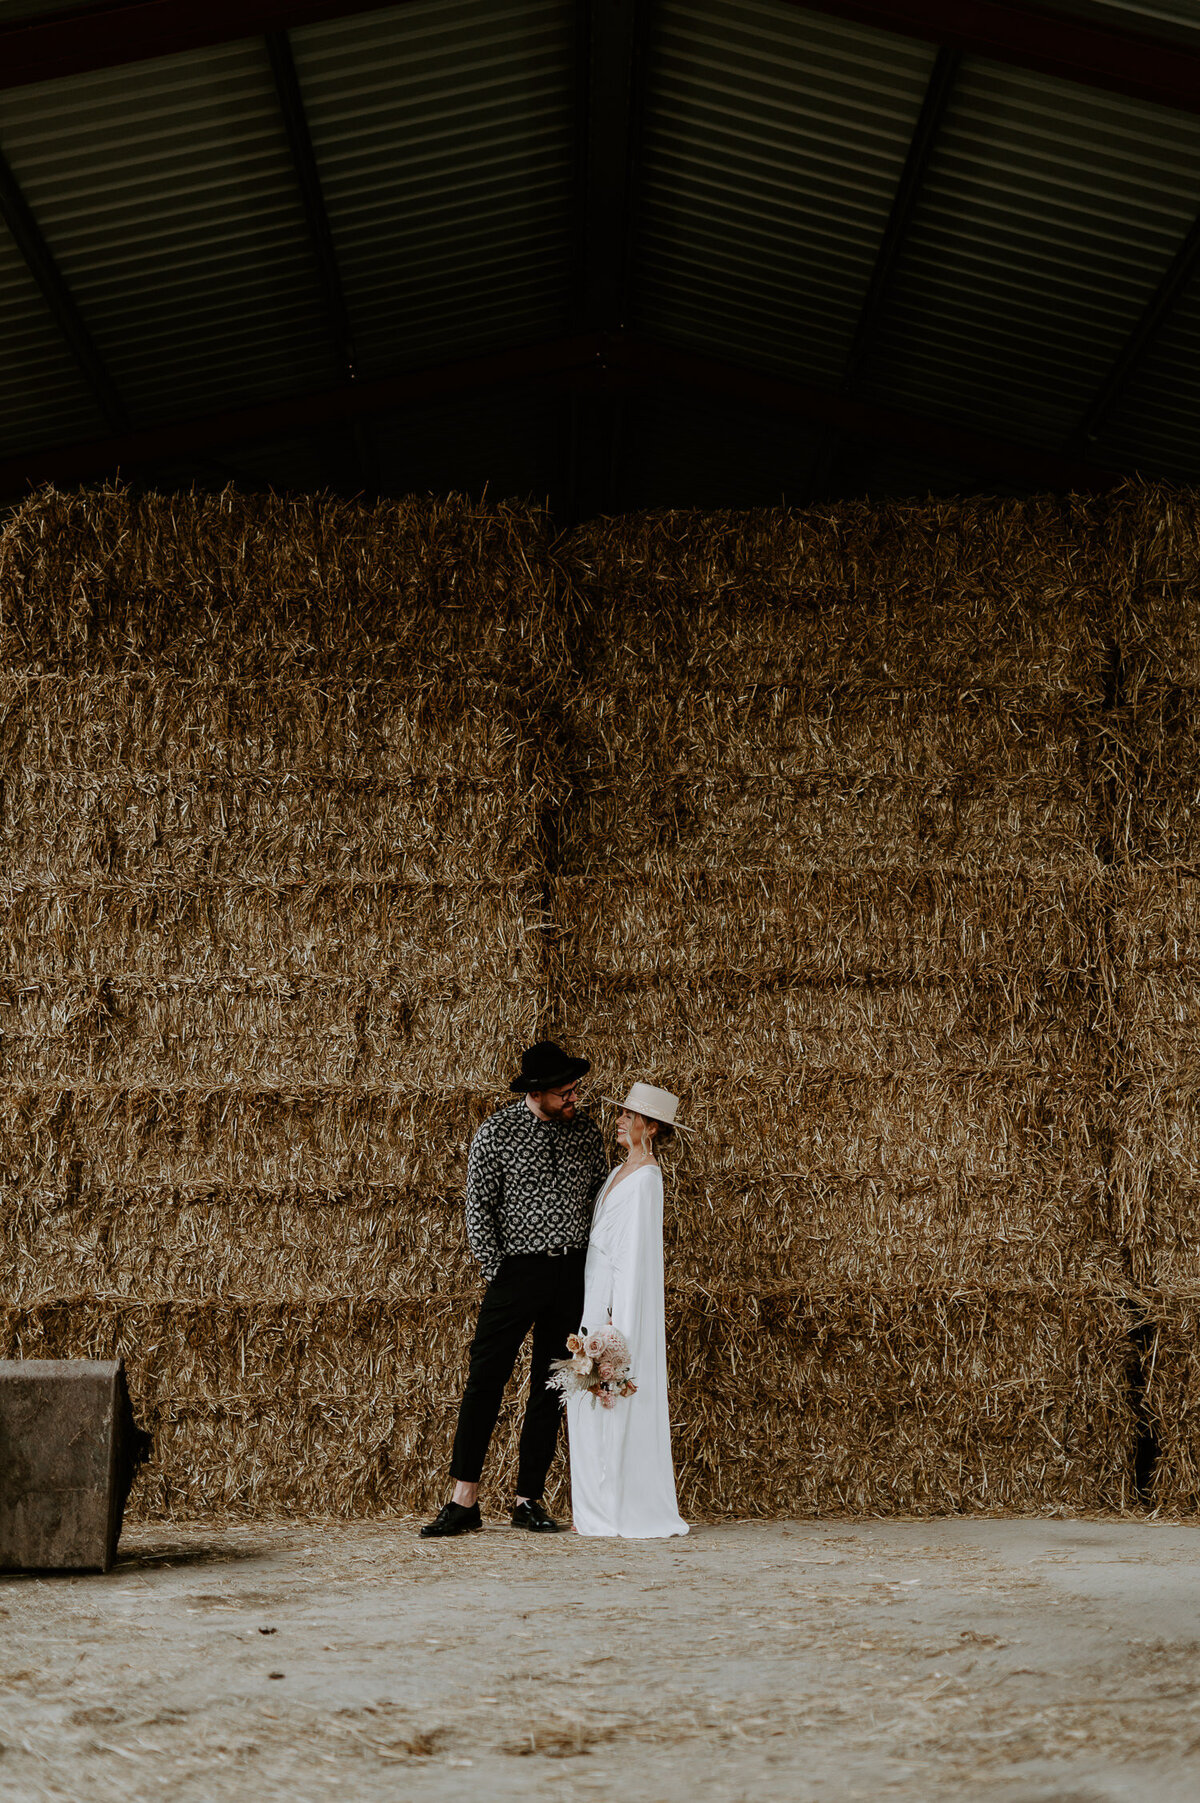 A bride and groom stand together infant of huge hay bales, the bride is wearing an oho wedding dress and a cool hat. The grooms wearing dr Martens, a black and white pattern shirt and matching hat.